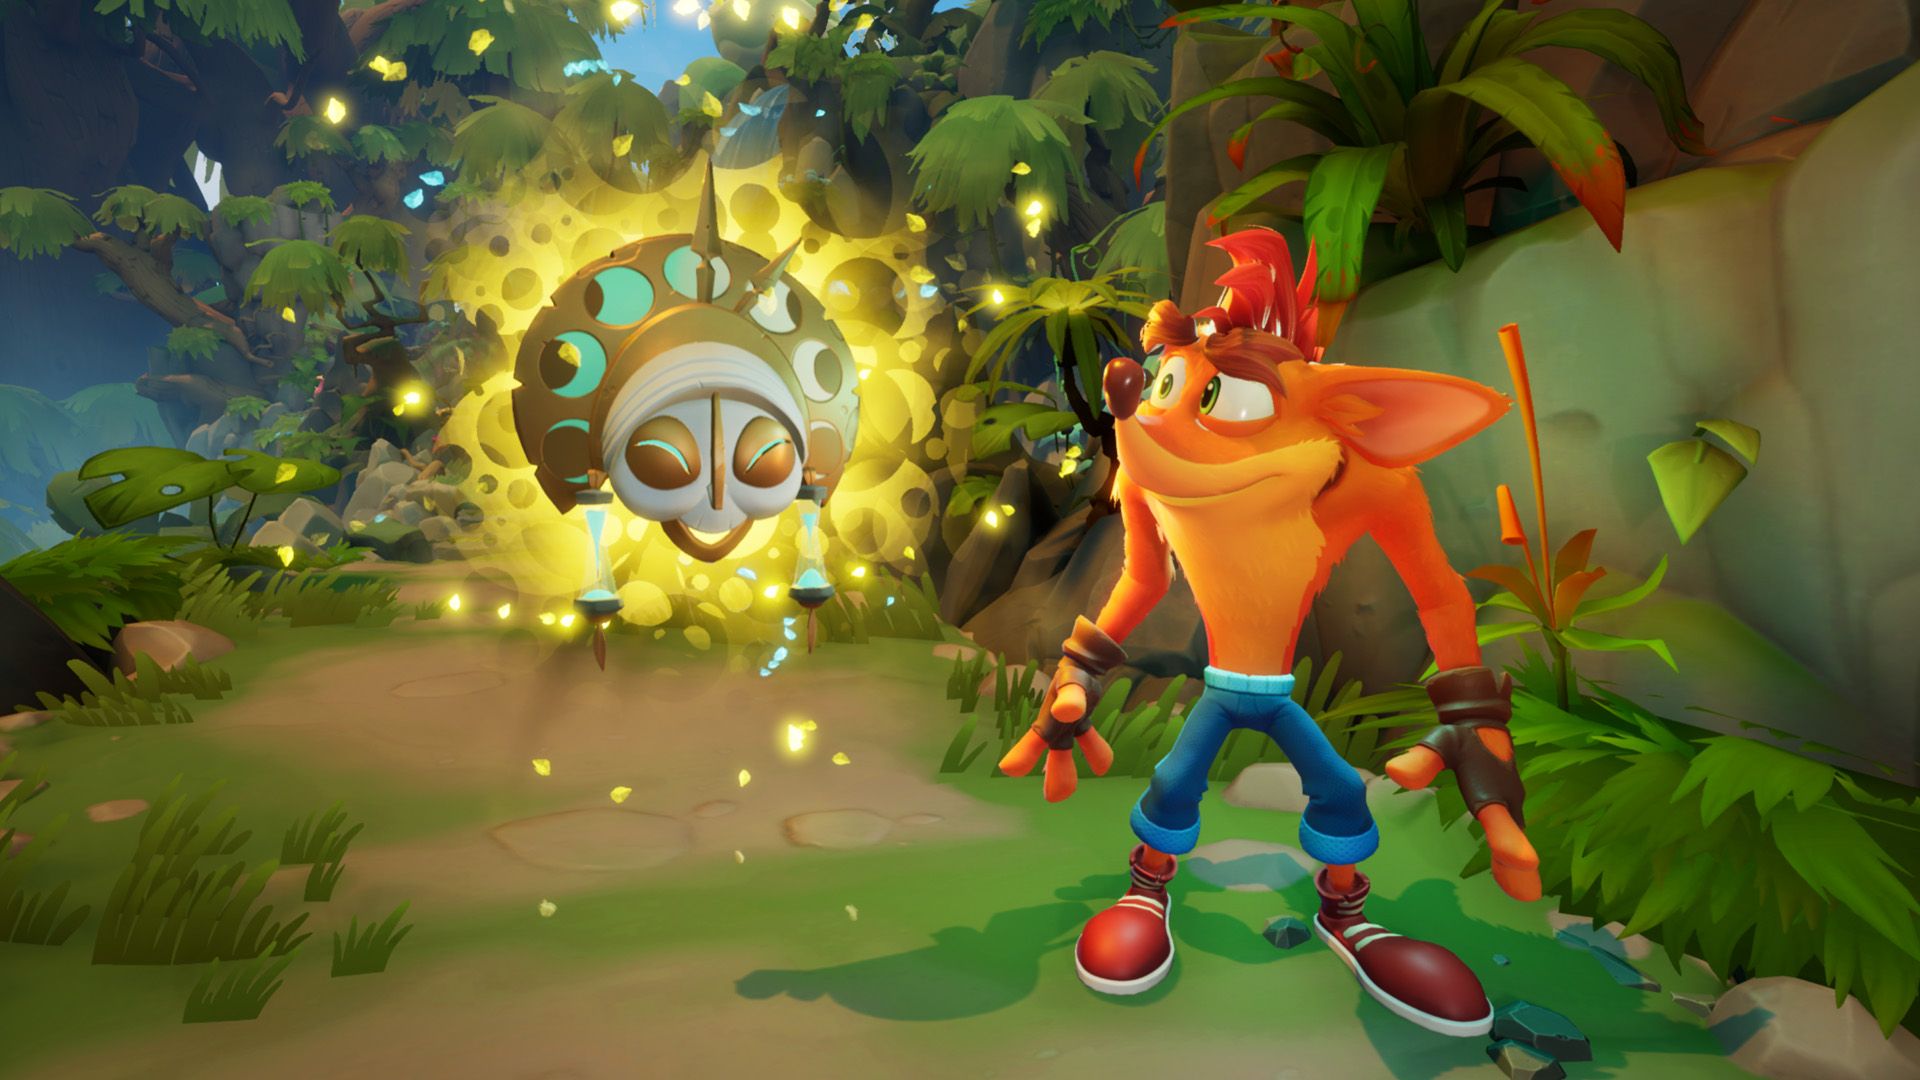 Crash Bandicoot 4: It's About Time demo is coming next week